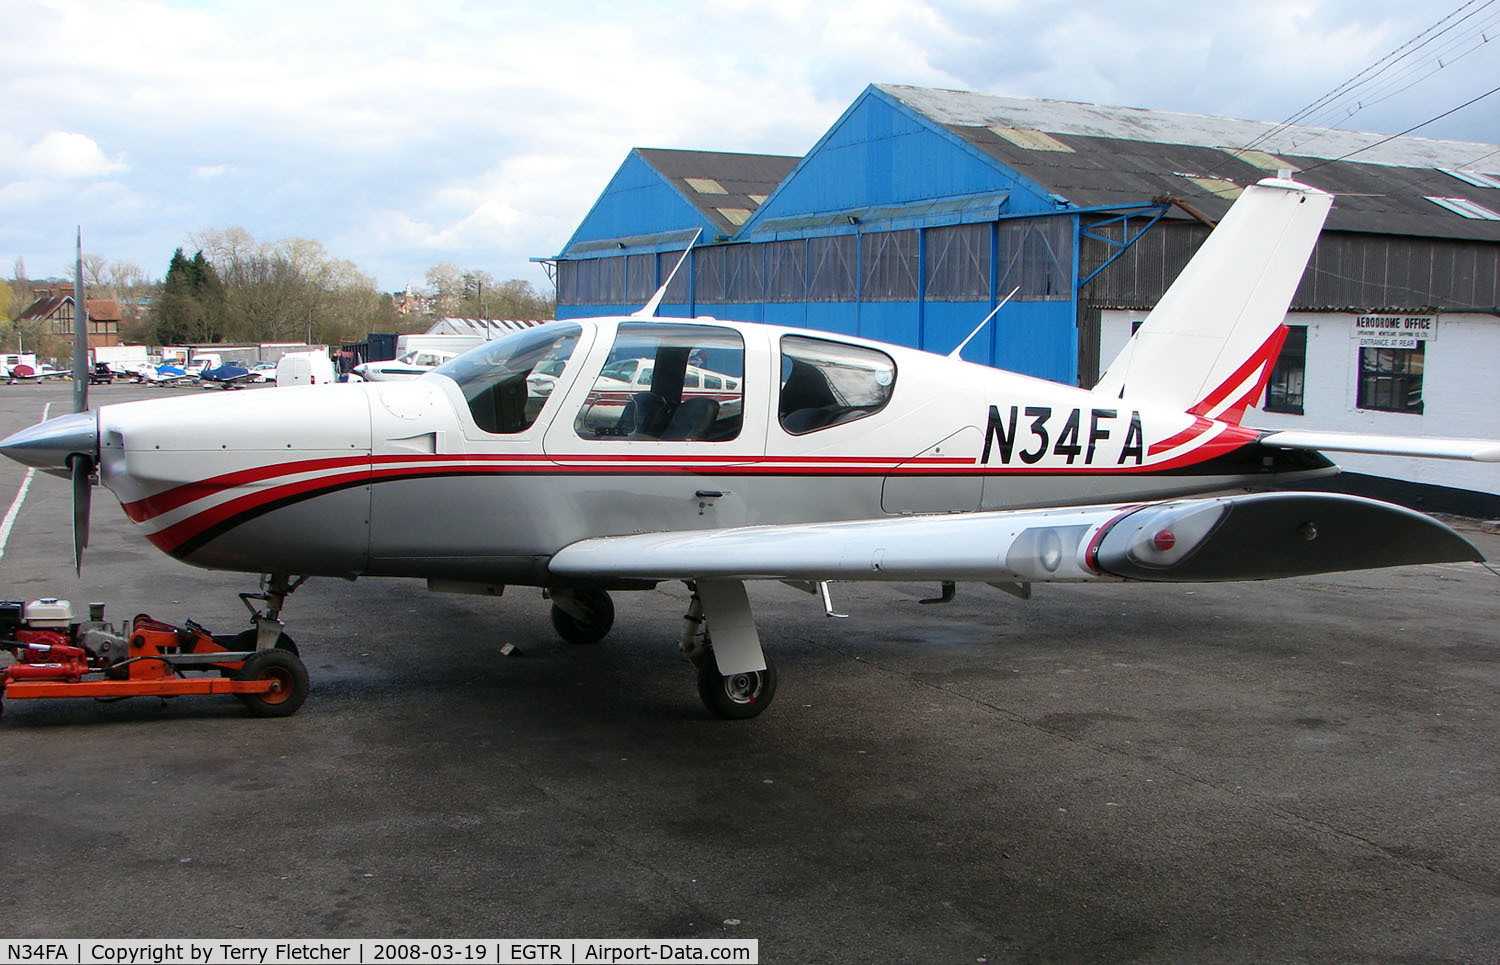 N34FA, 1988 Socata TB-20 Trinidad C/N 866, Part of the busy GA scene at Elstree Airfield in the northern suburbs of London